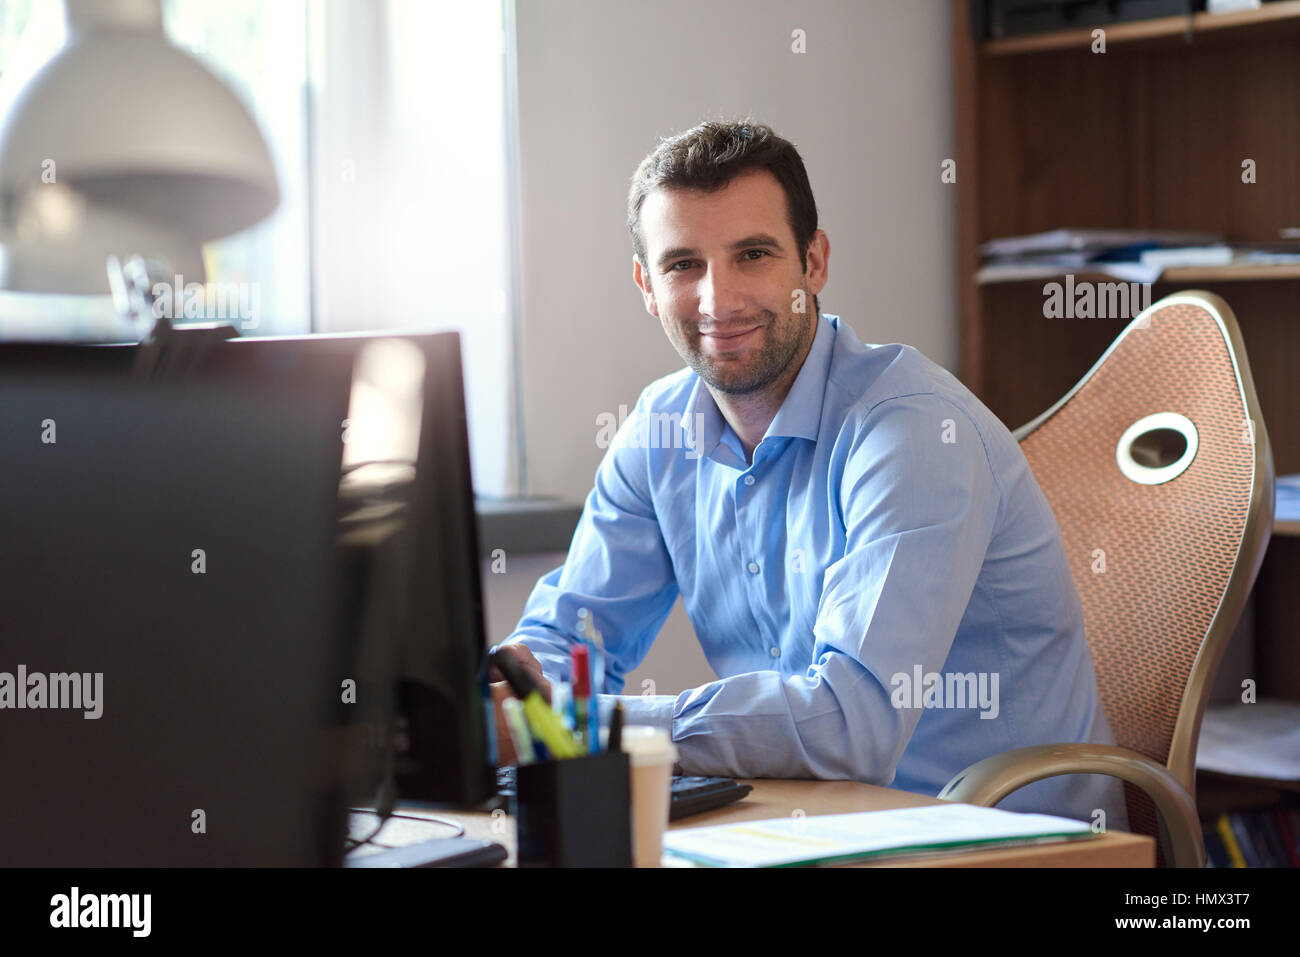 Smiling businessman at work in an office Stock Photo